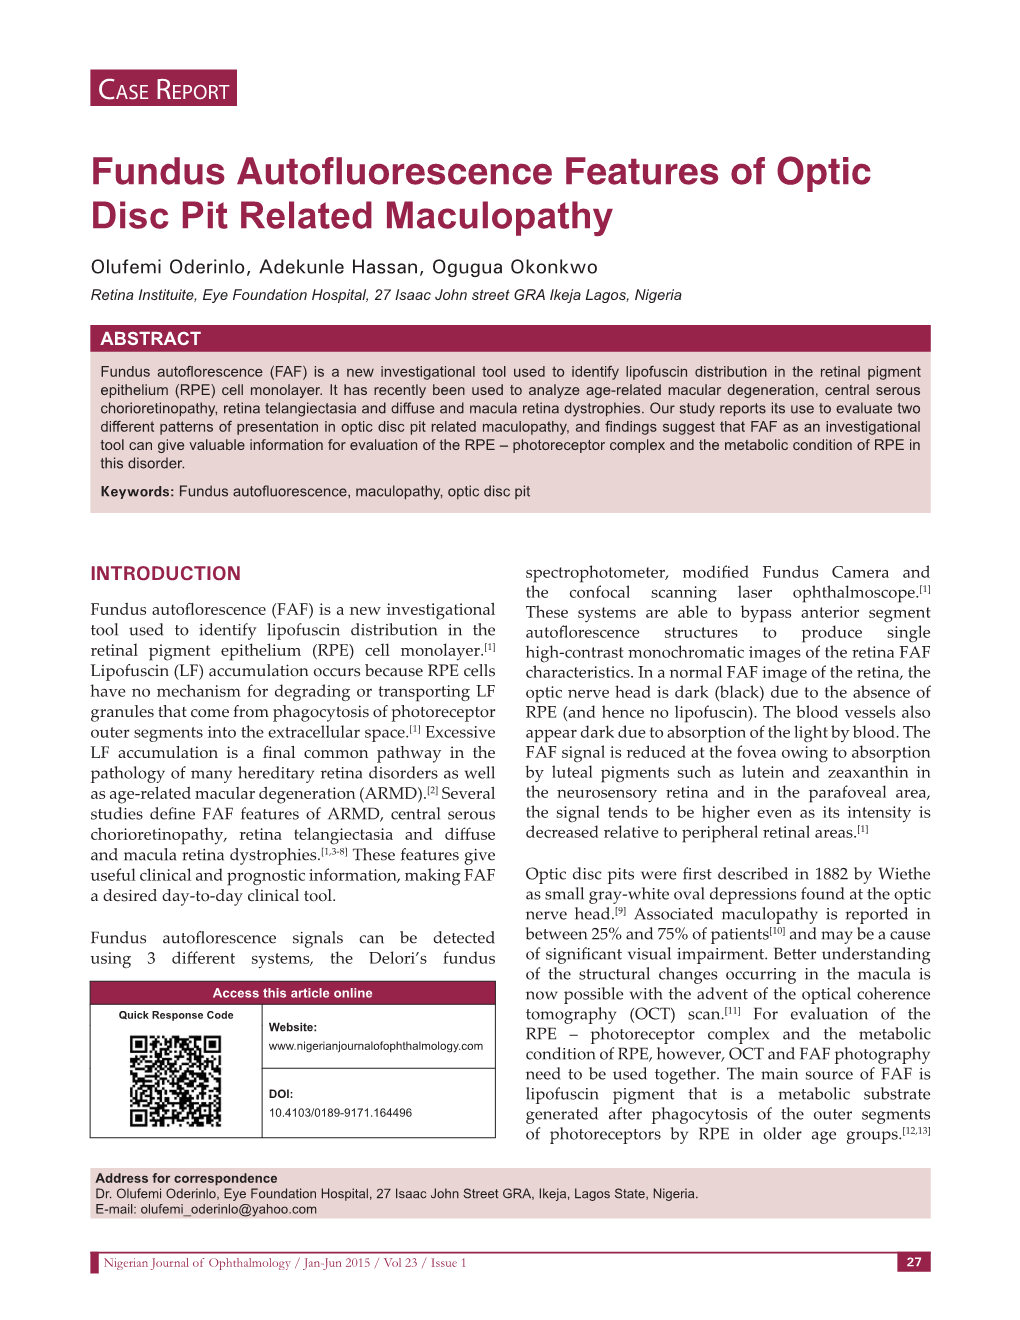 Fundus Autofluorescence Features of Optic Disc Pit Related